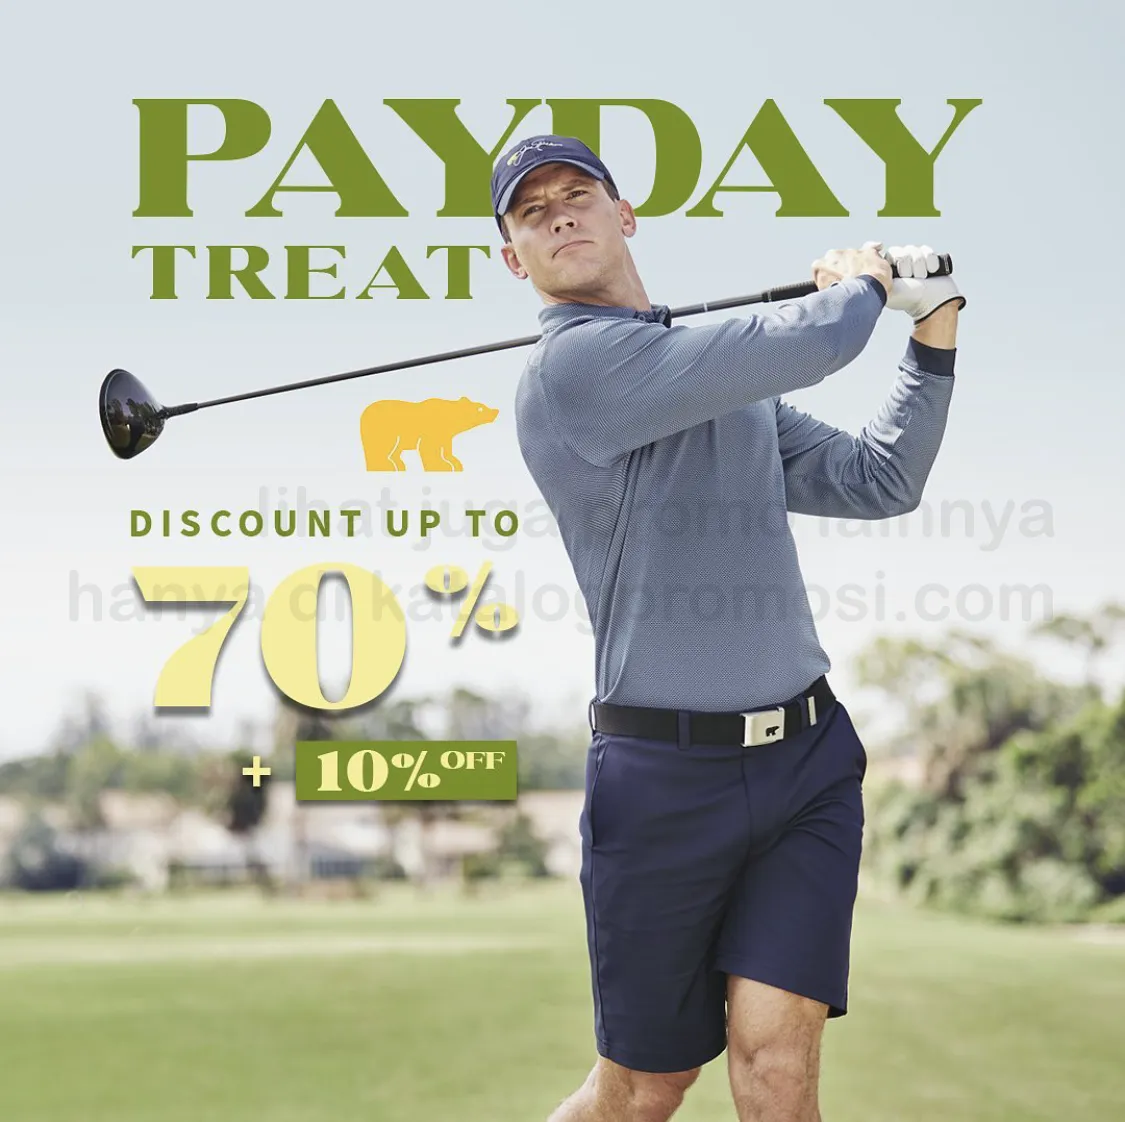 Promo Jack Nicklaus PAYDAY TREAT - Discount Up To 70% + 10%